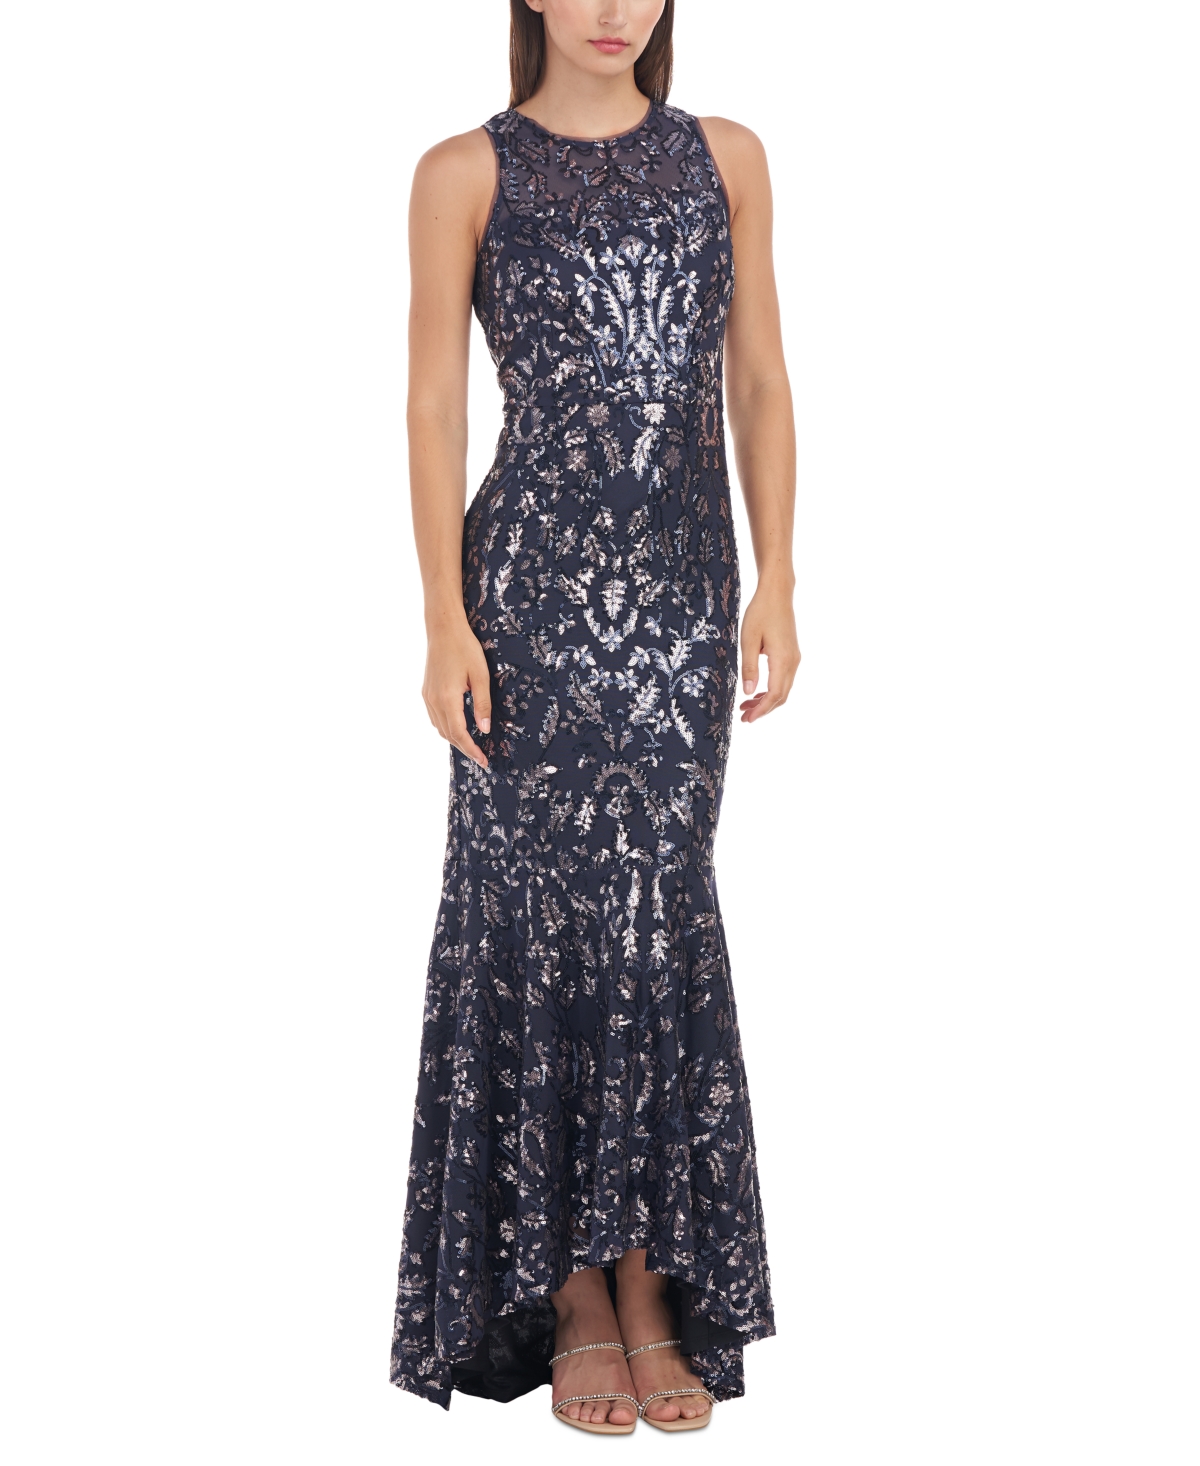 Js Collections Women's Sloane Sequin-Covered Halter-Style Gown